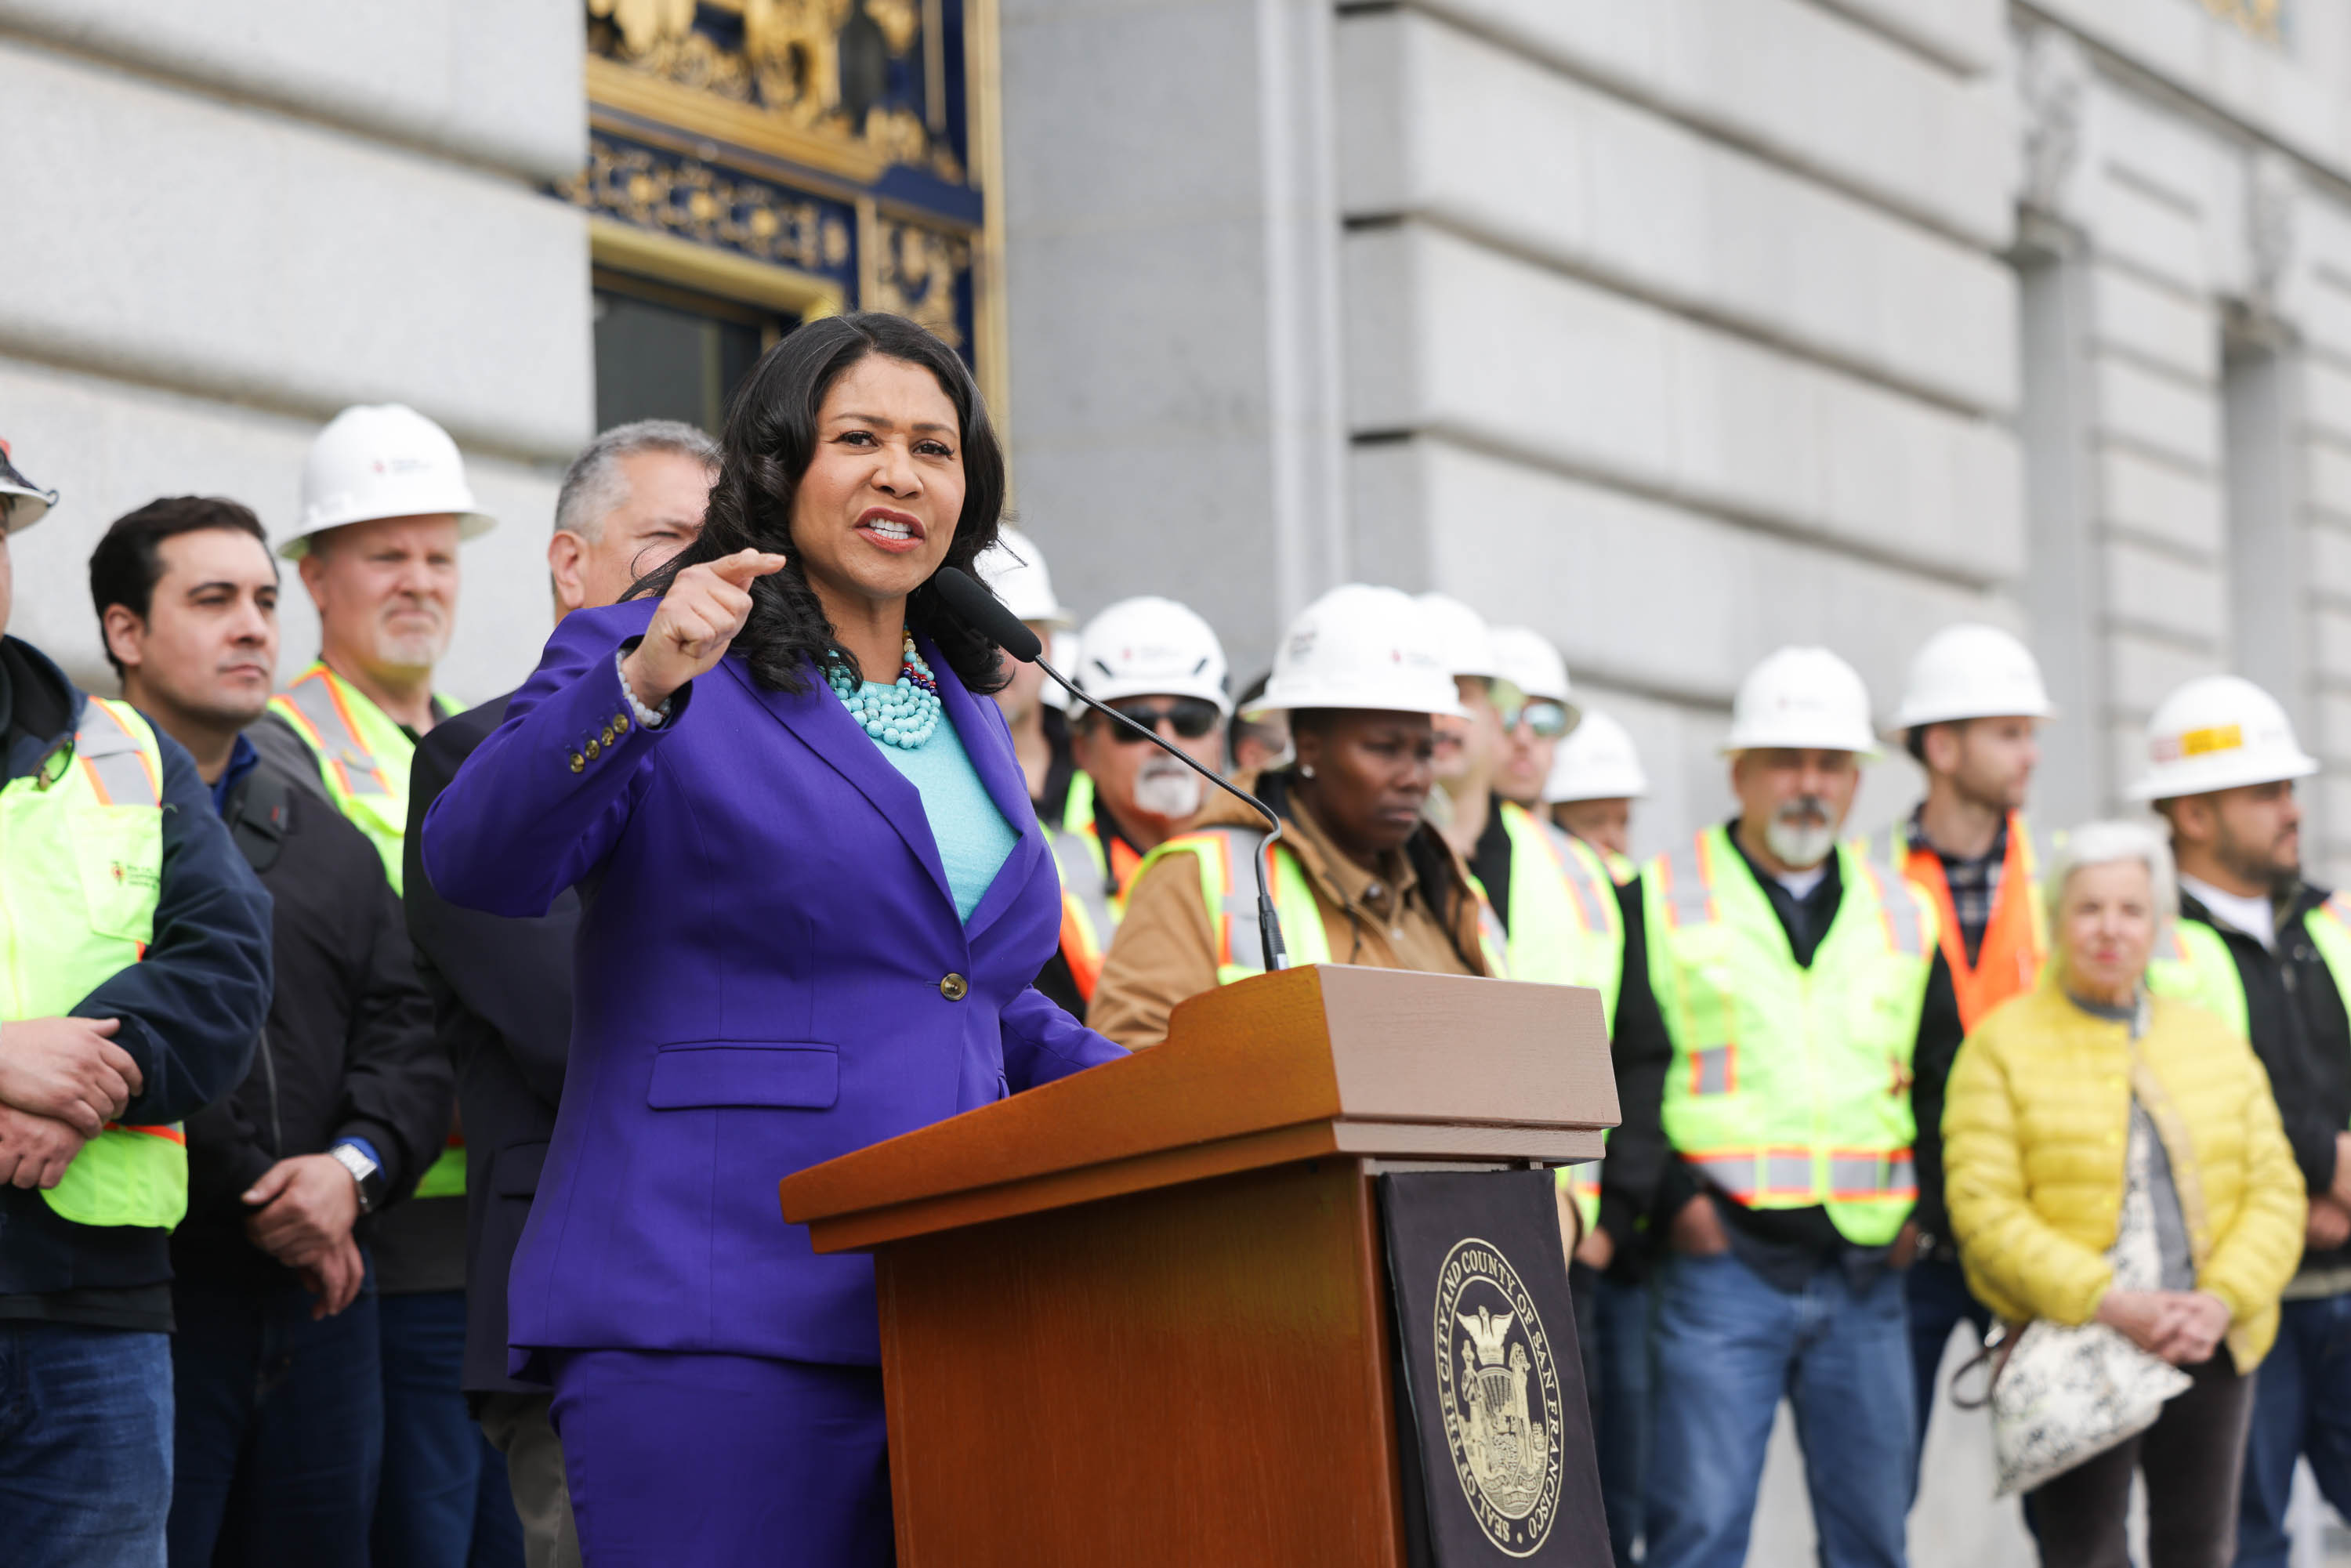 San Francisco Mayor London Breed speaks at a podium with a group of people in construction vests and helmets.